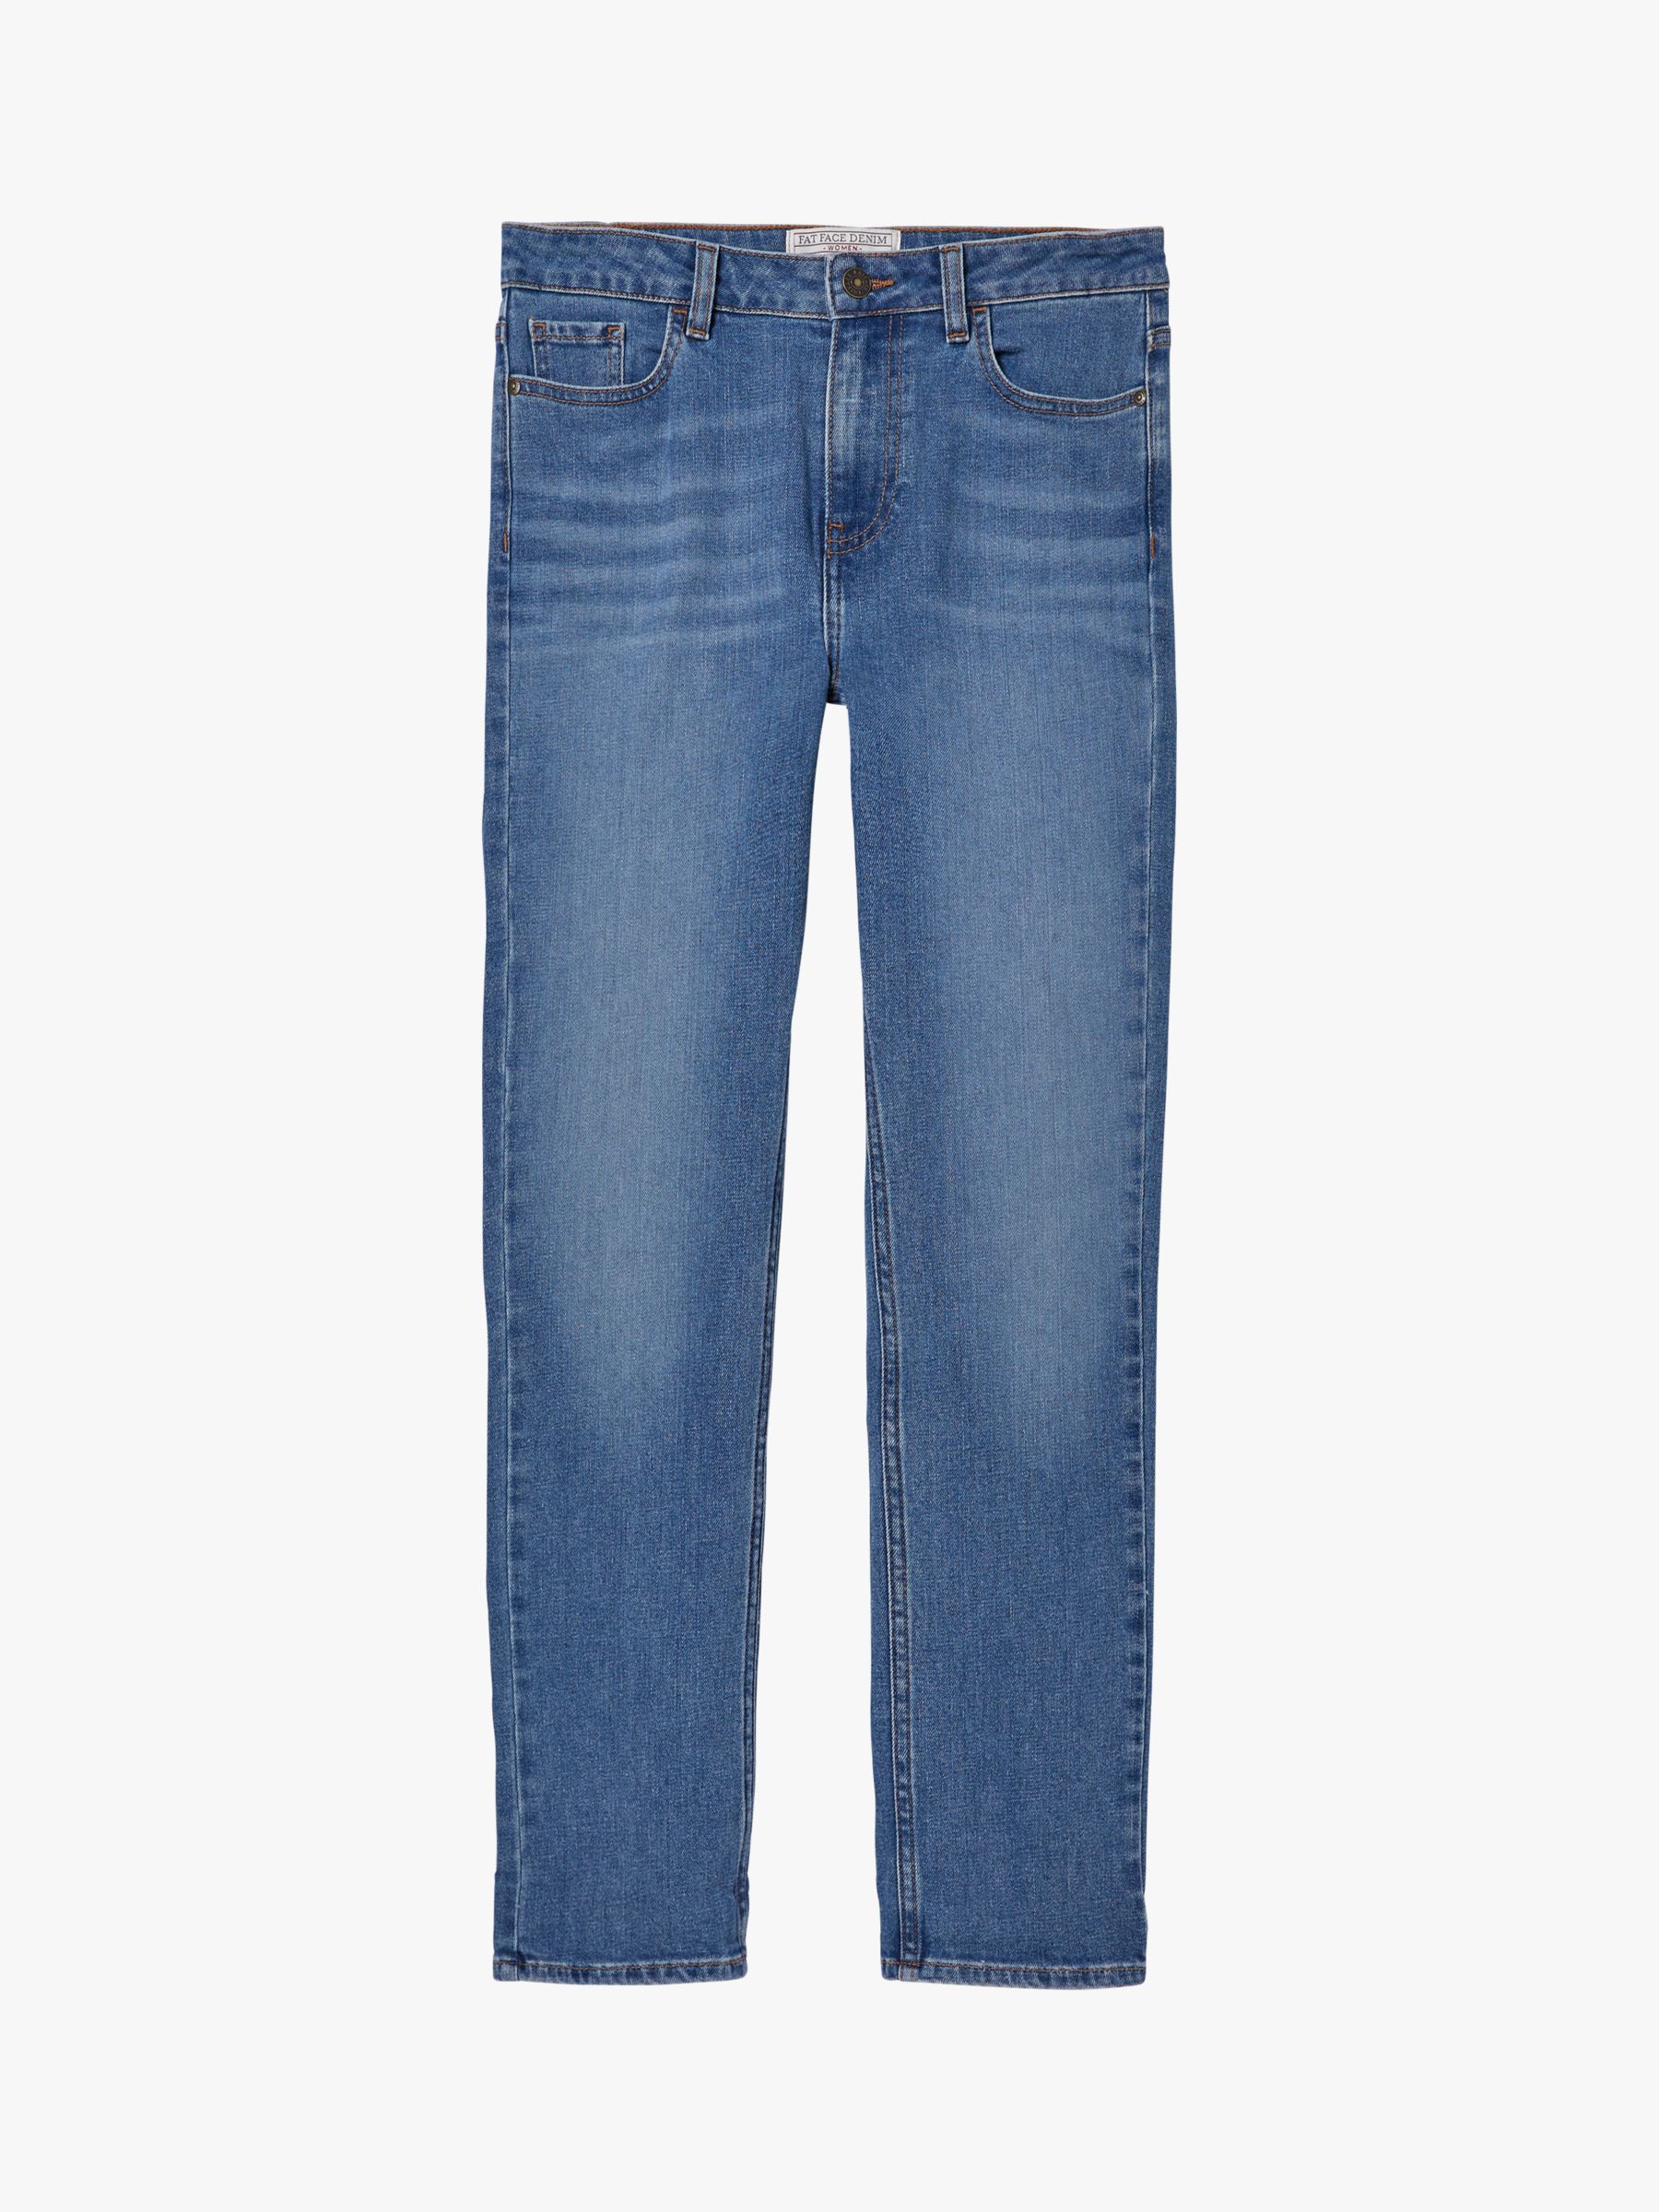 Fatface Chesham Girlfriend Jeans Light Wash At John Lewis And Partners